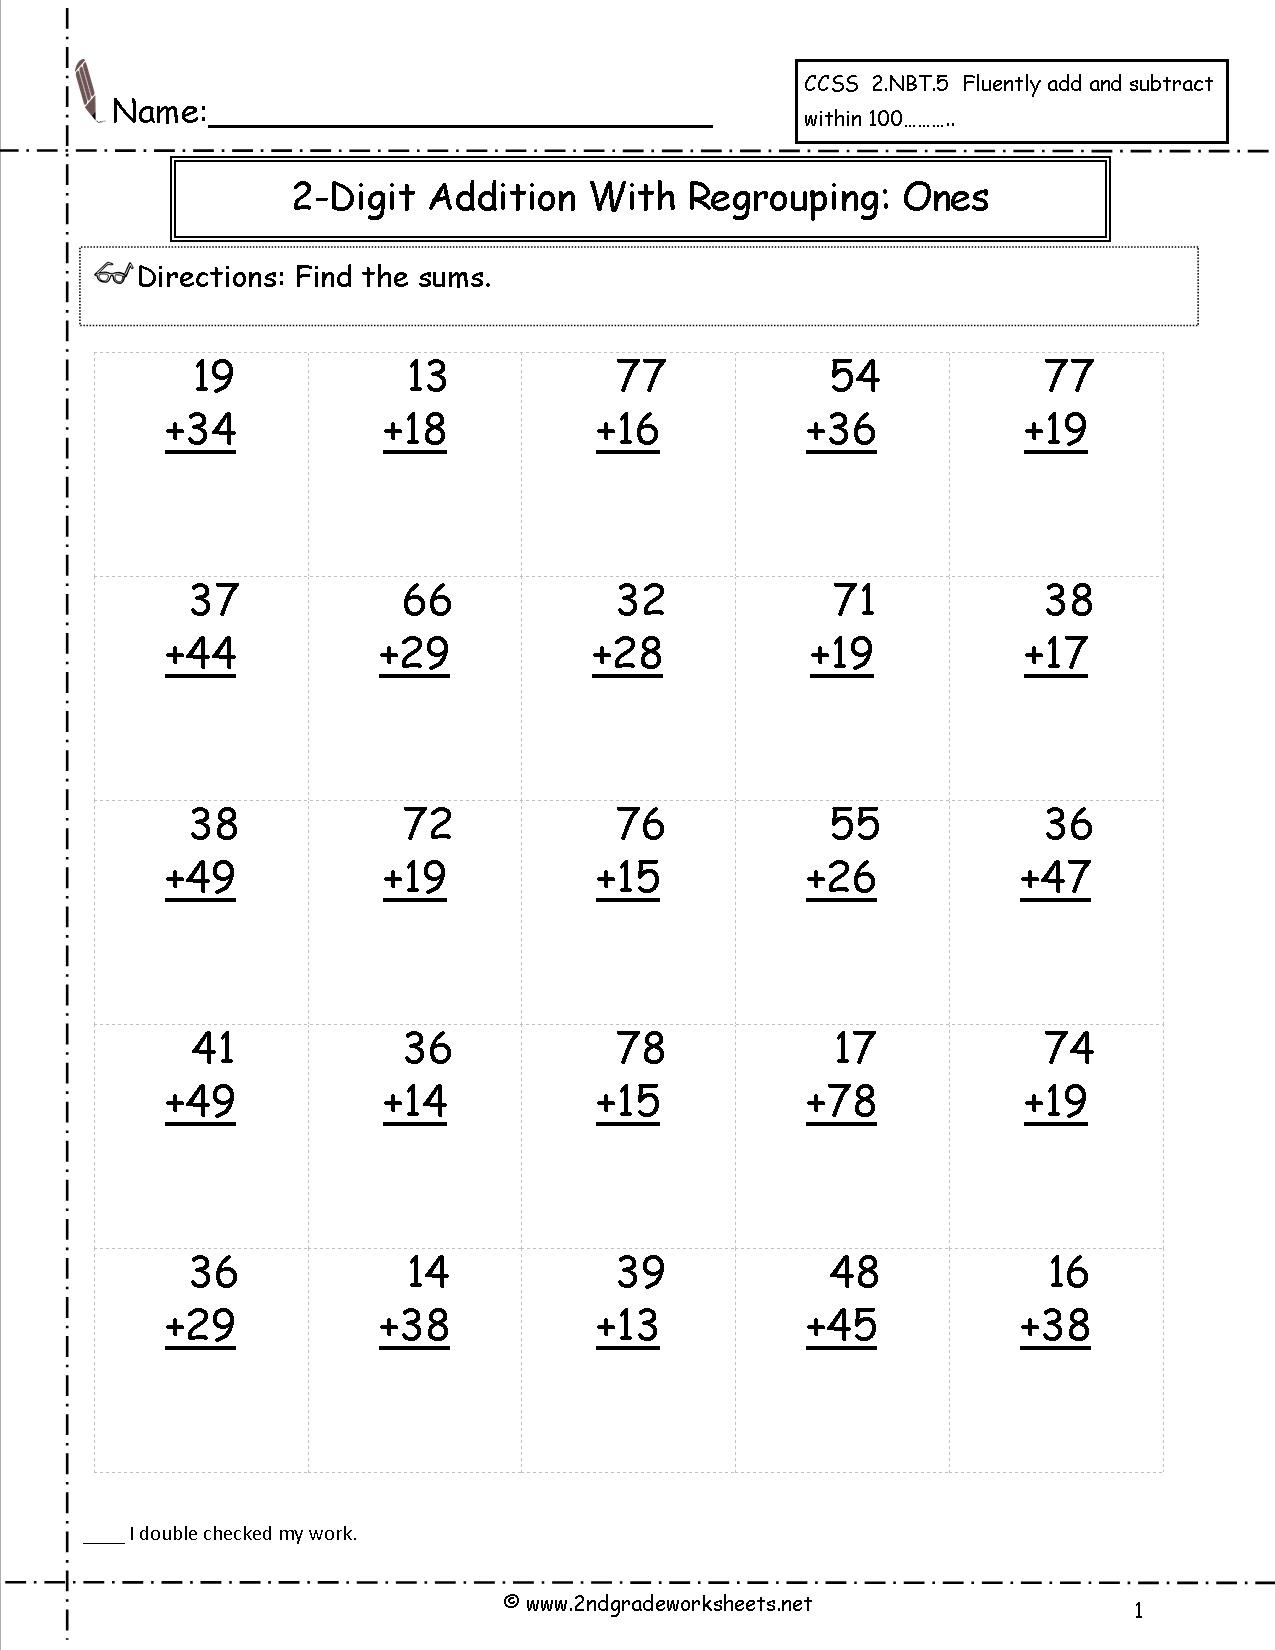 Free Math Worksheets And Printouts - Free Printable Math Worksheets For 2Nd Grade